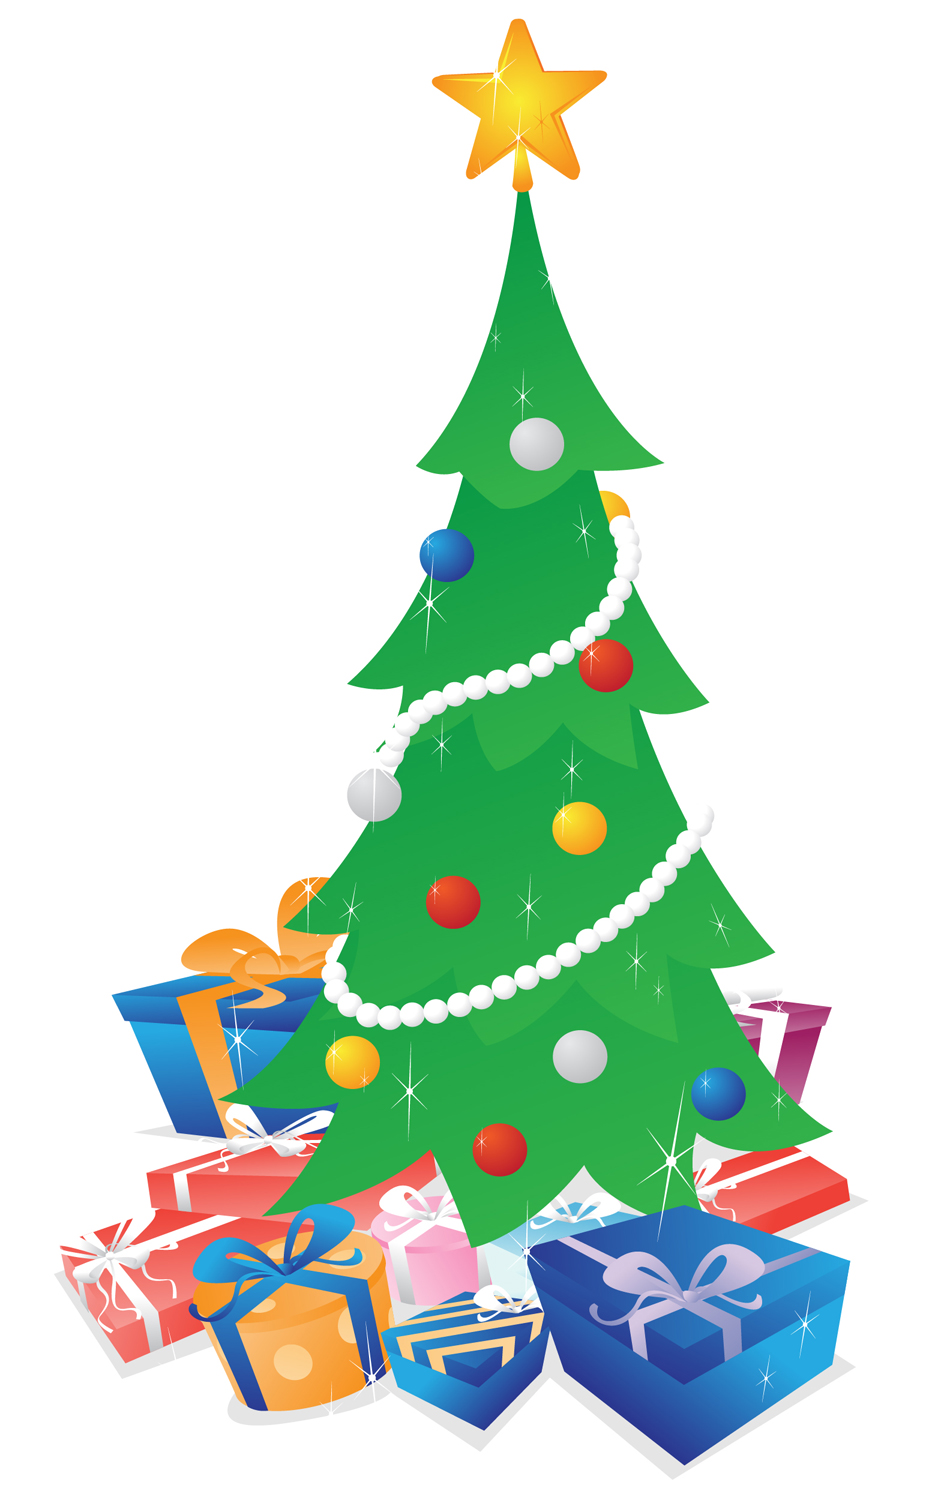 Christmas Tree with Presents Clip Art